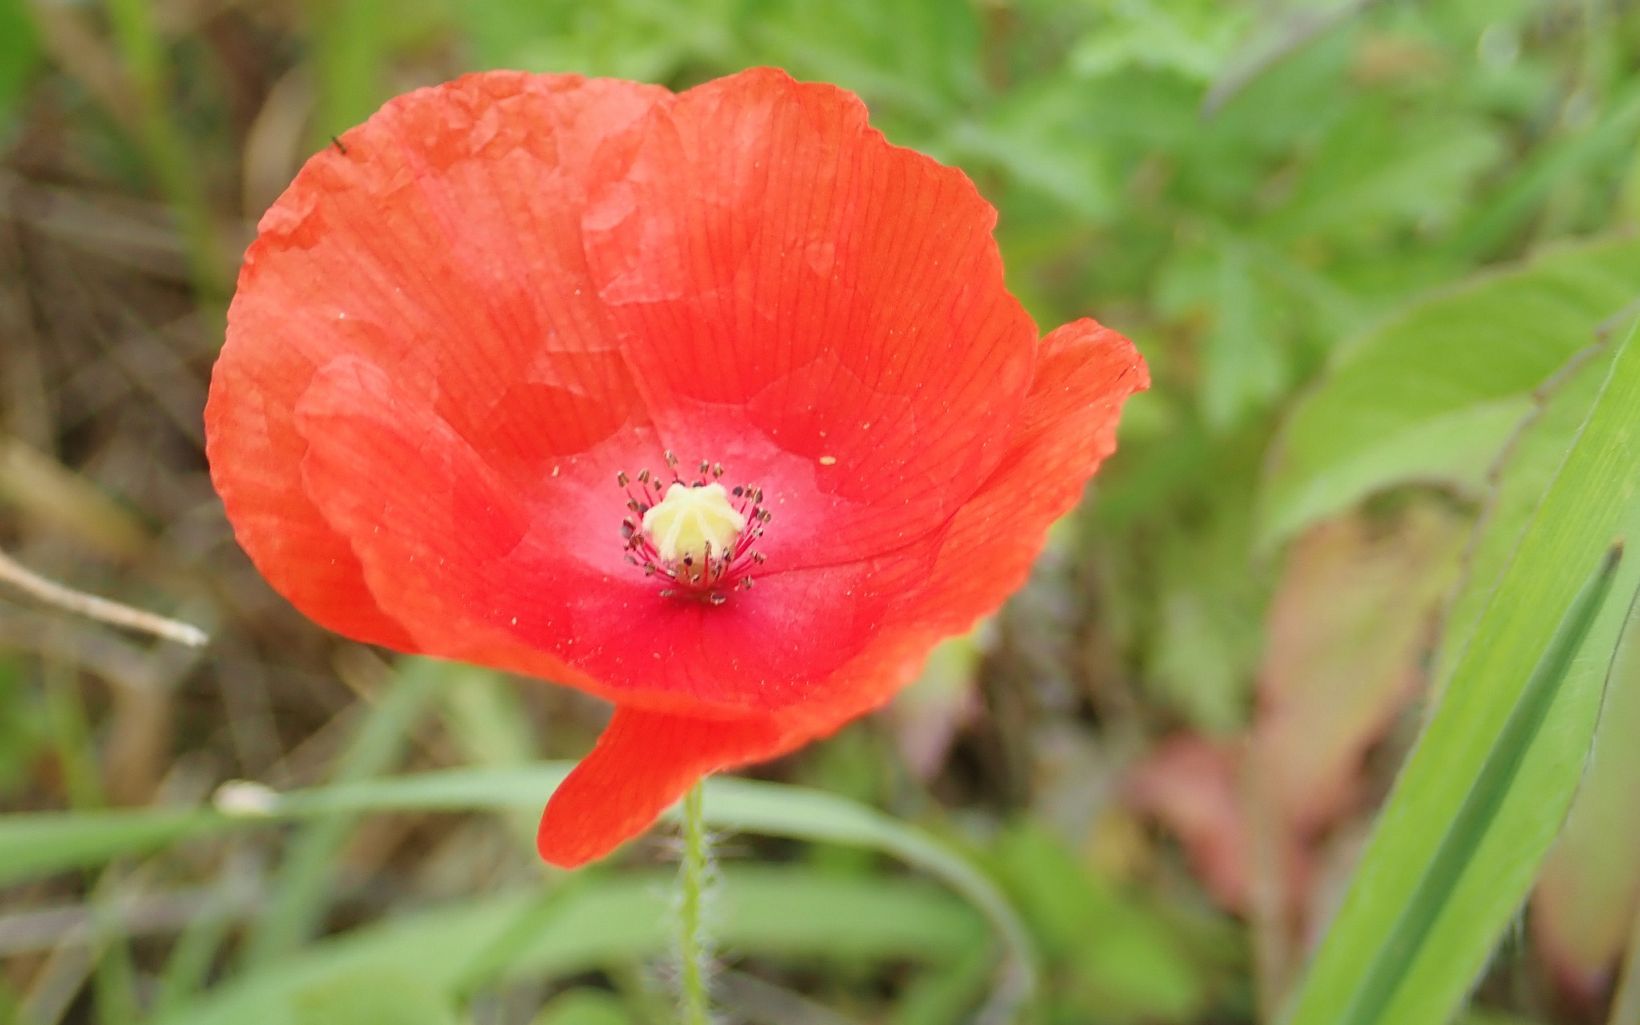 Closeup of a bright red poppy flower.